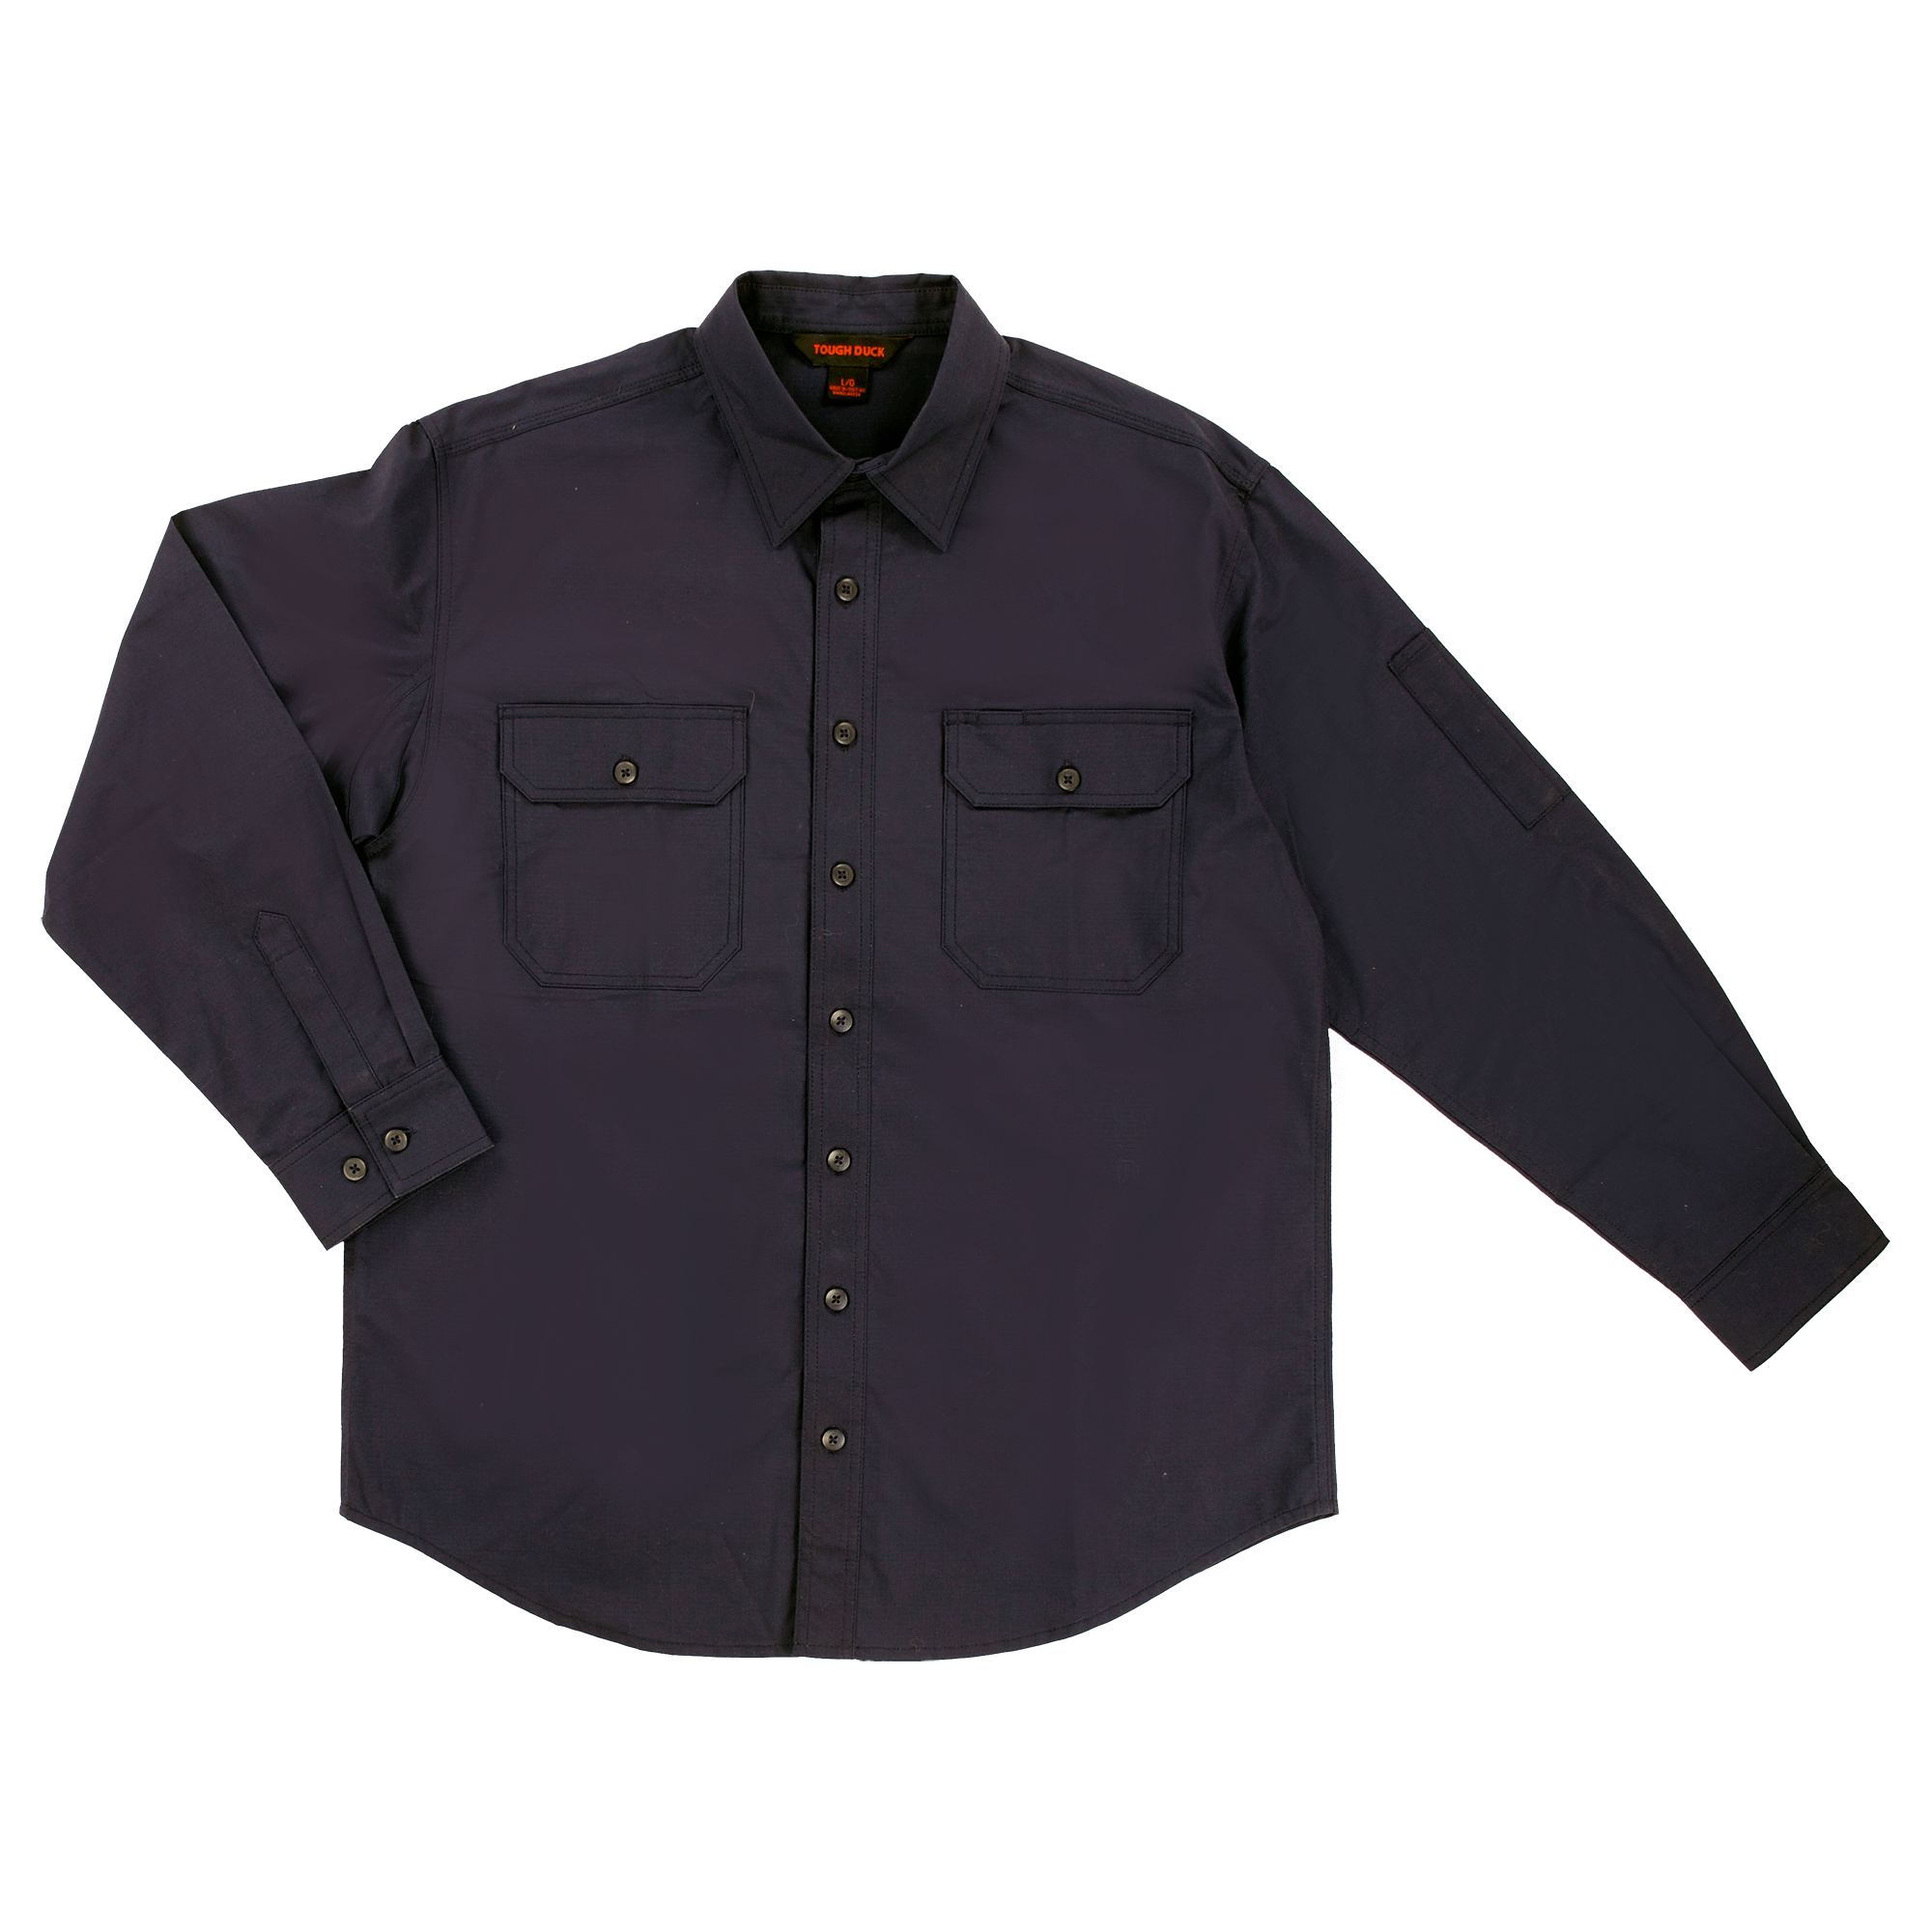 TOUGH DUCK L/S STRETCH RIPSTOP SHIRT - Mucksters Supply Corp